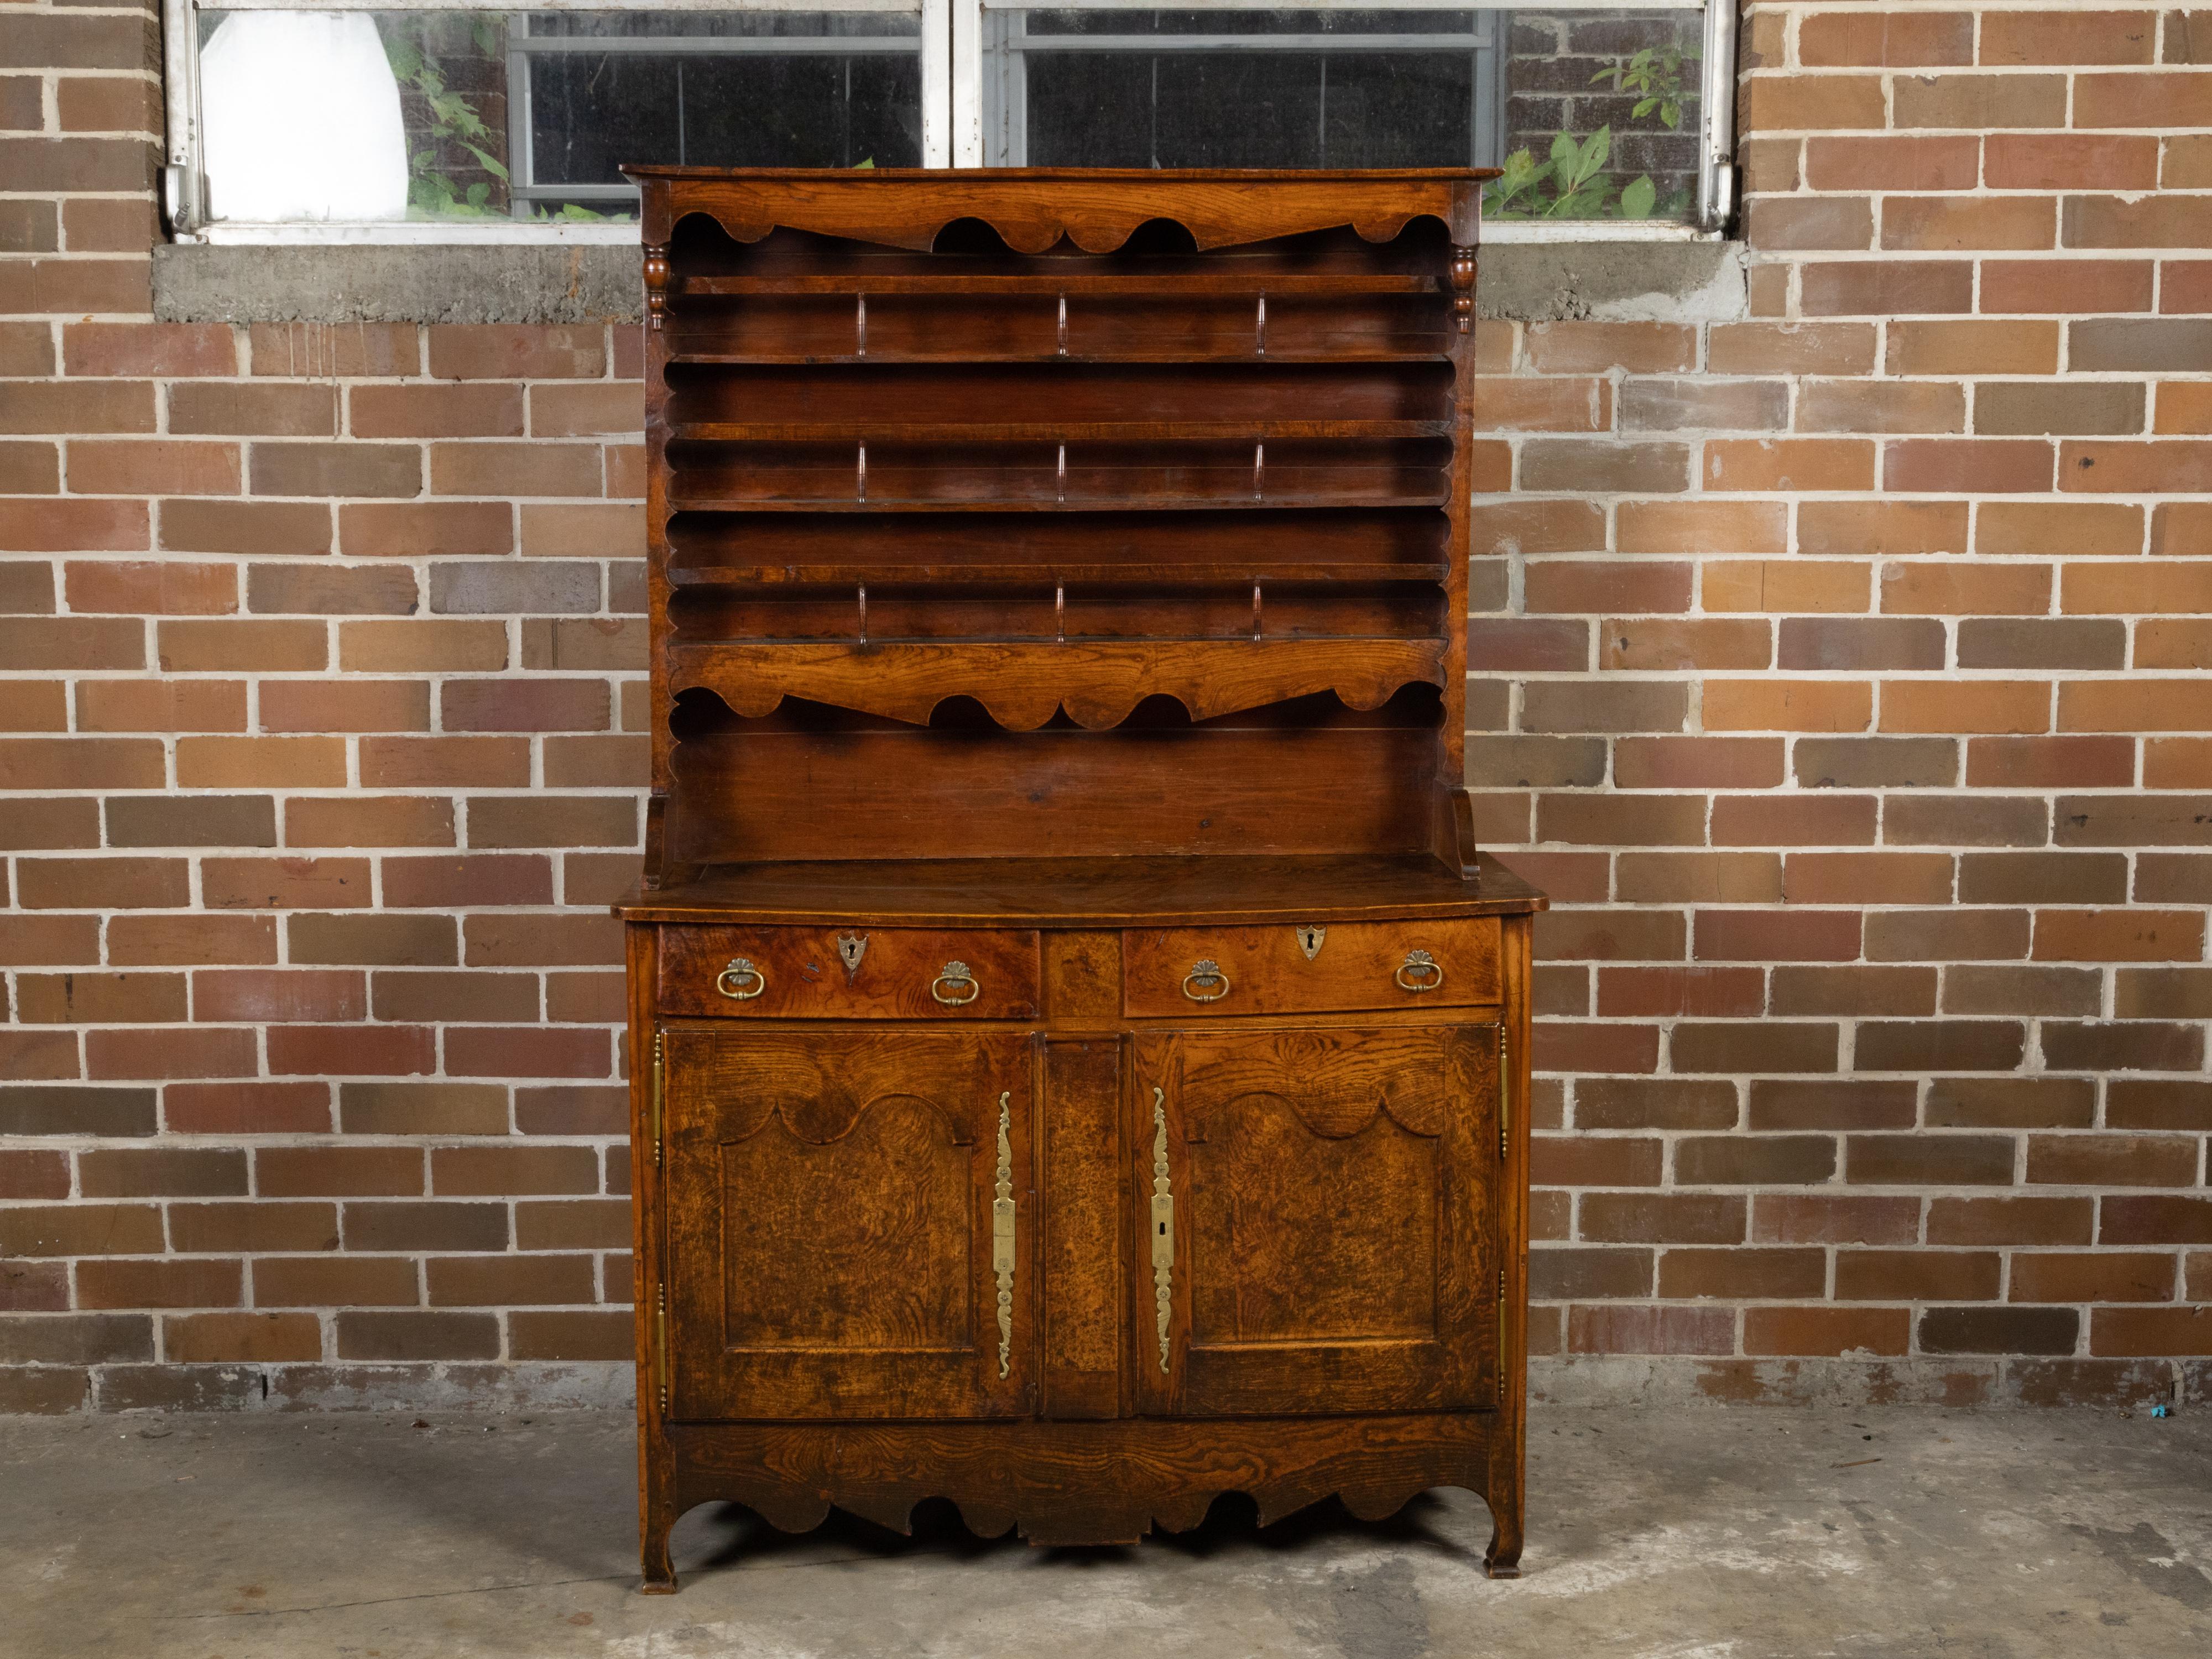 A French elm vaisselier from the 19th century, with open shelves, lower buffet and scalloped accents. Created in France during the 19th century, this elm vaisselier hutch features narrow open shelves in the upper section secured with a thin baluster